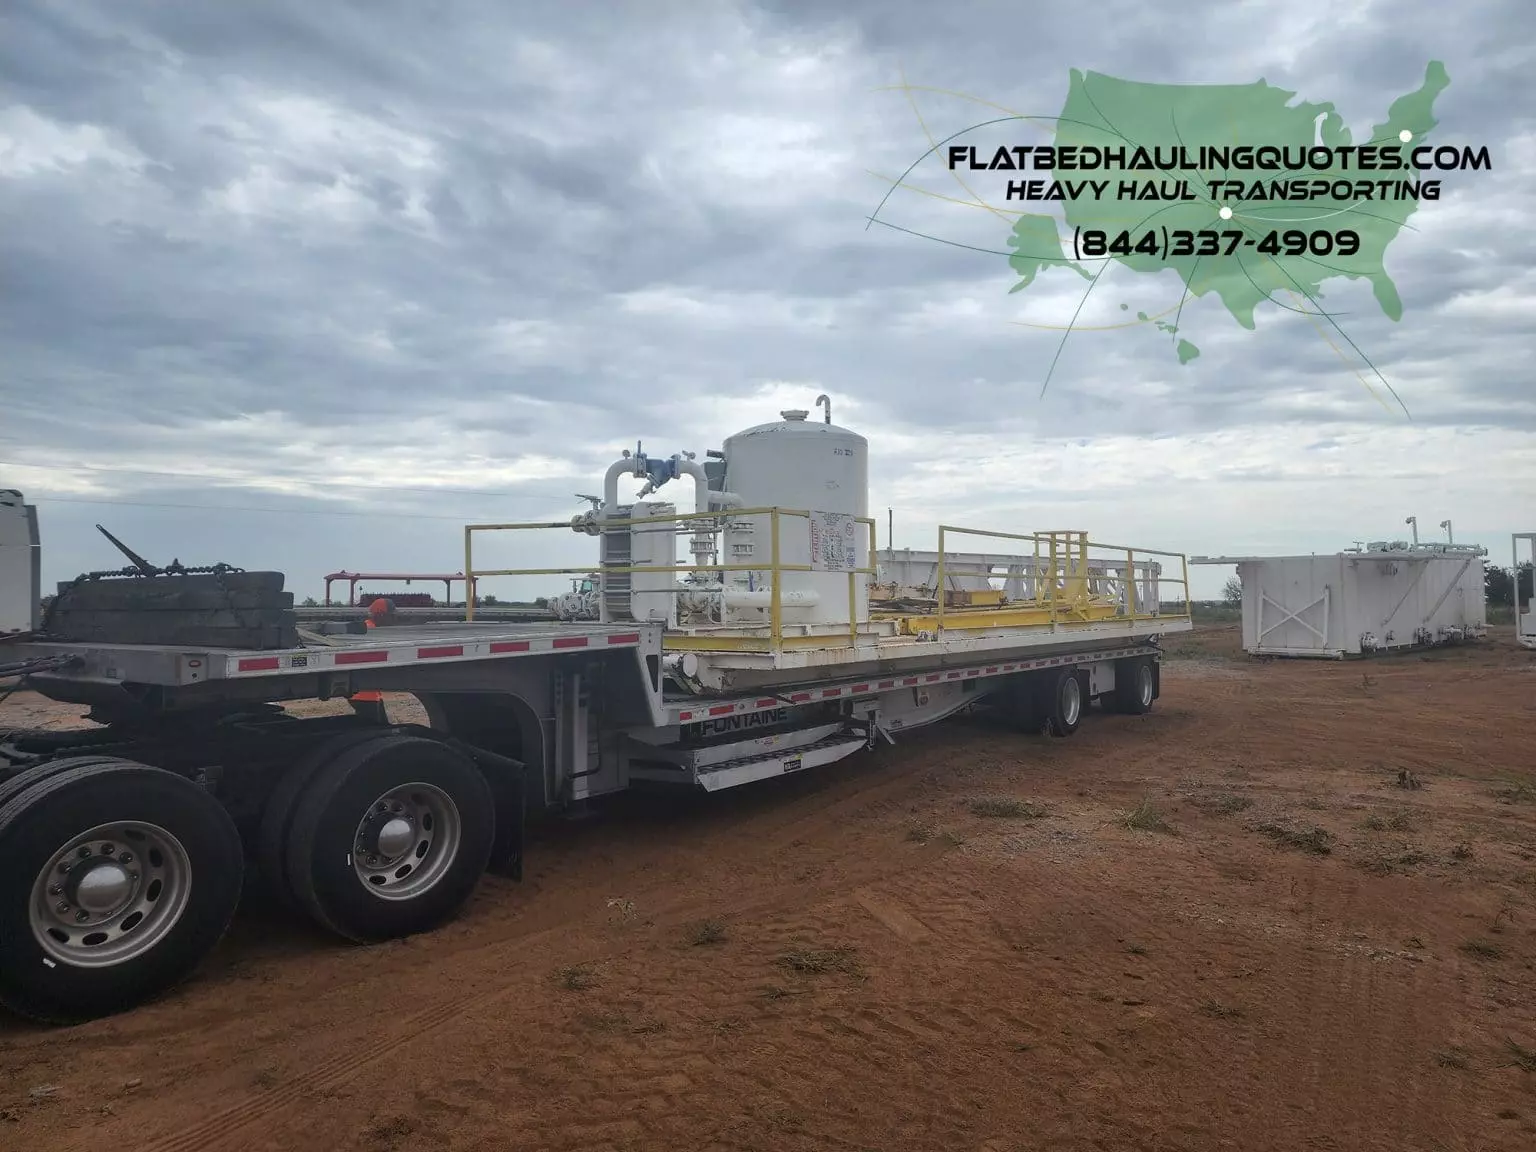 Equipment Hauling Services, Heavy Equipment Hauling Services, Flatbed Trucking Companies, Heavy Equipment Movers, Heavy Haulers ,